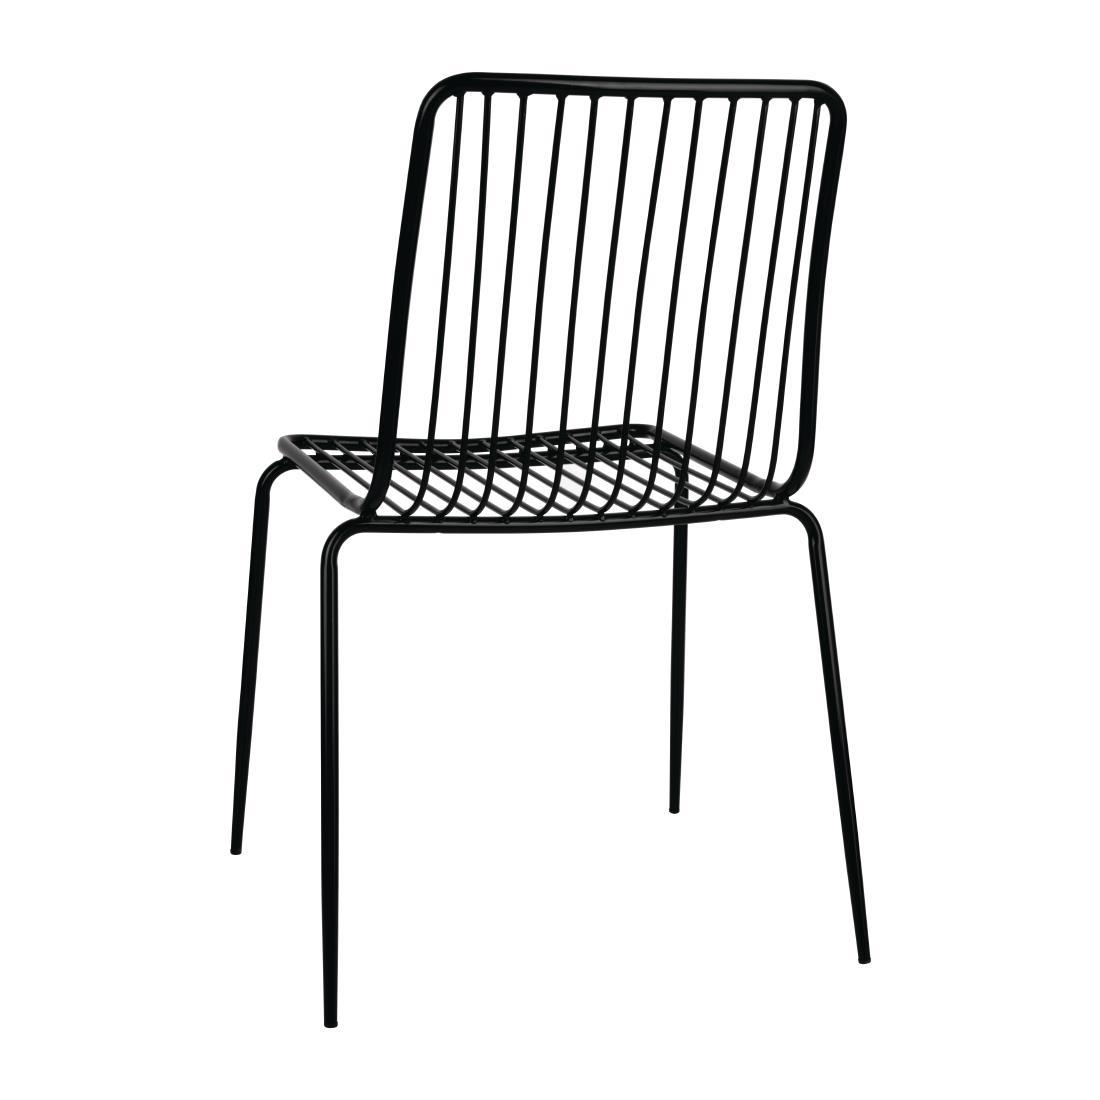 Bolero Steel Wire Dining Chairs (Pack of 4) - FB874  - 3